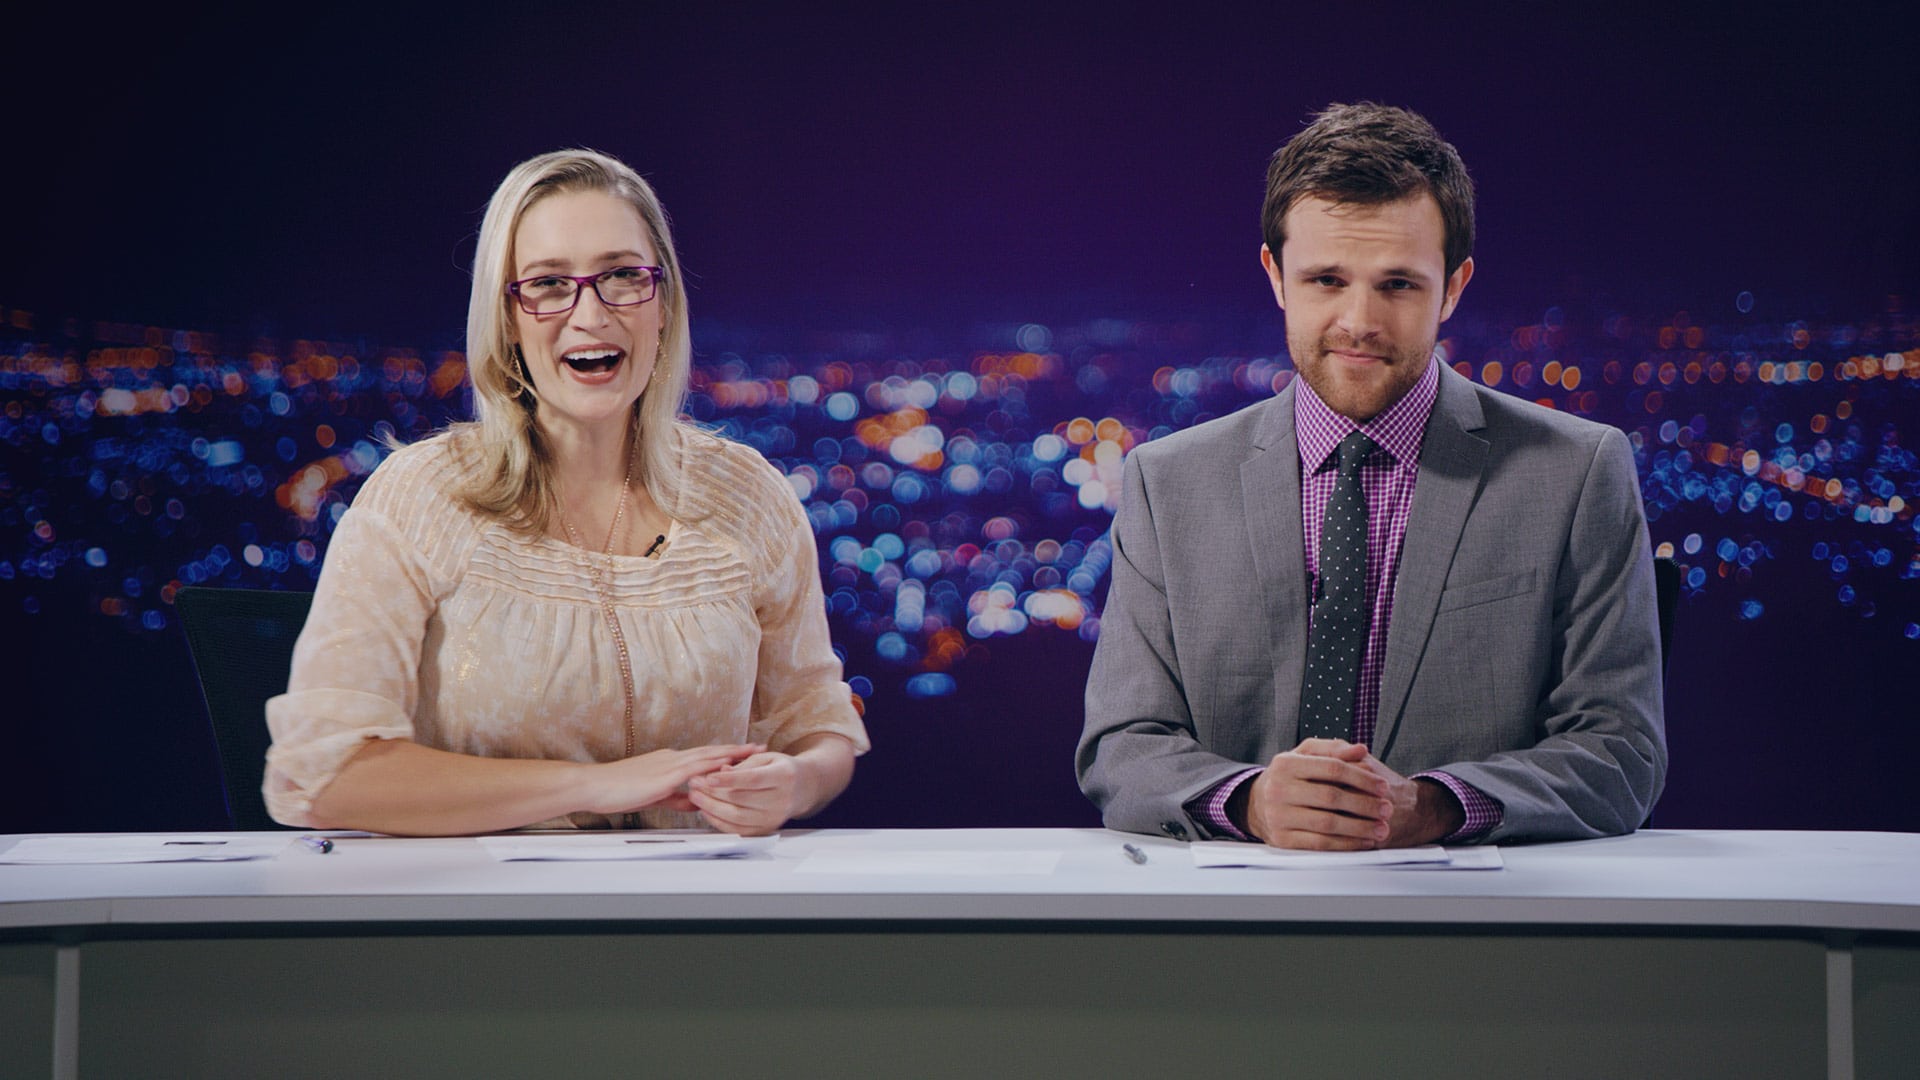 Actors playing news anchors for a wireless company commercial